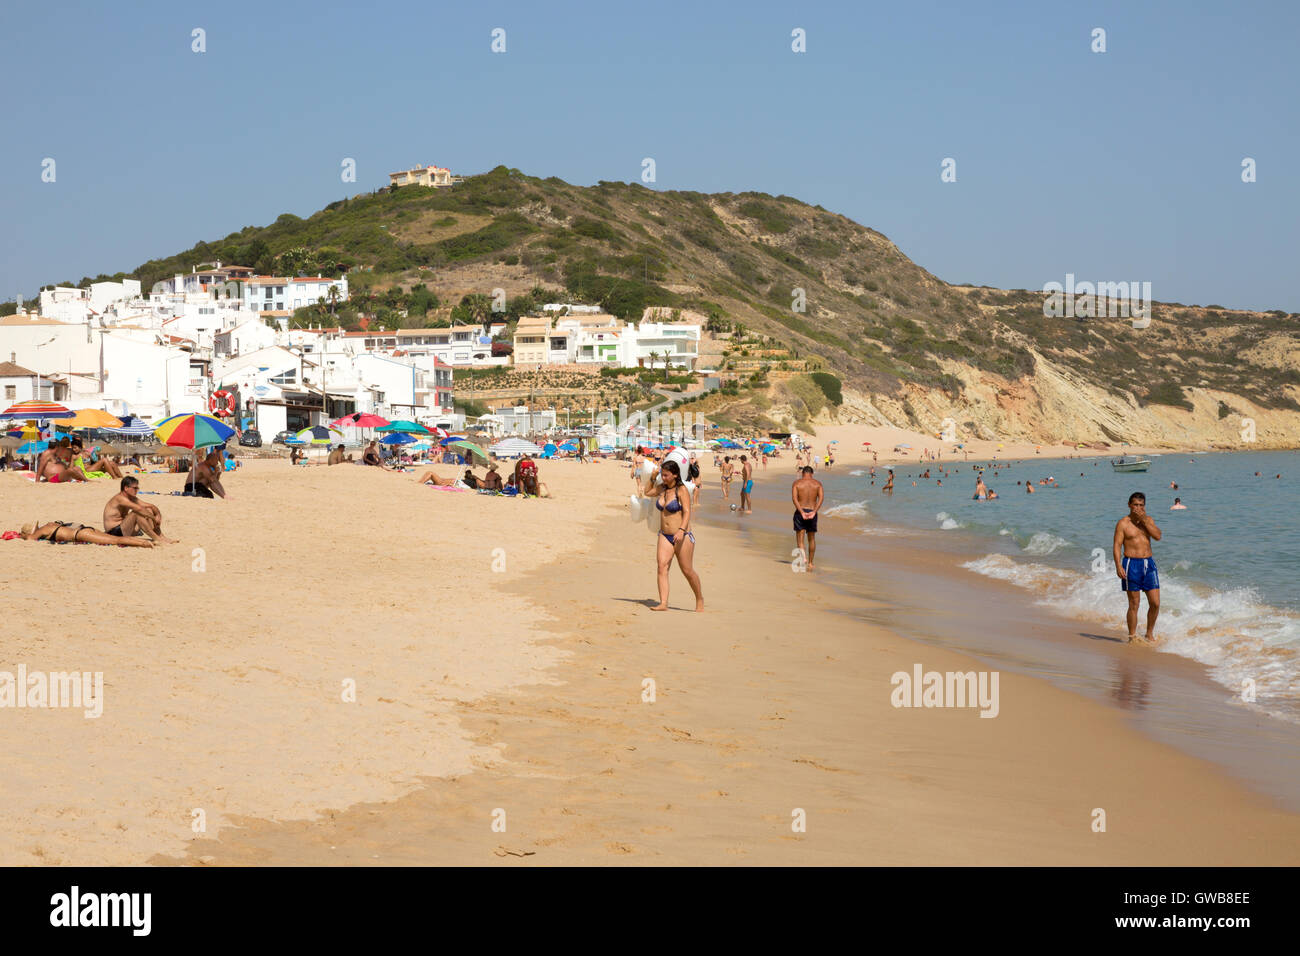 People on the beach at Salema, Algarve, Portugal, Europe Stock Photo